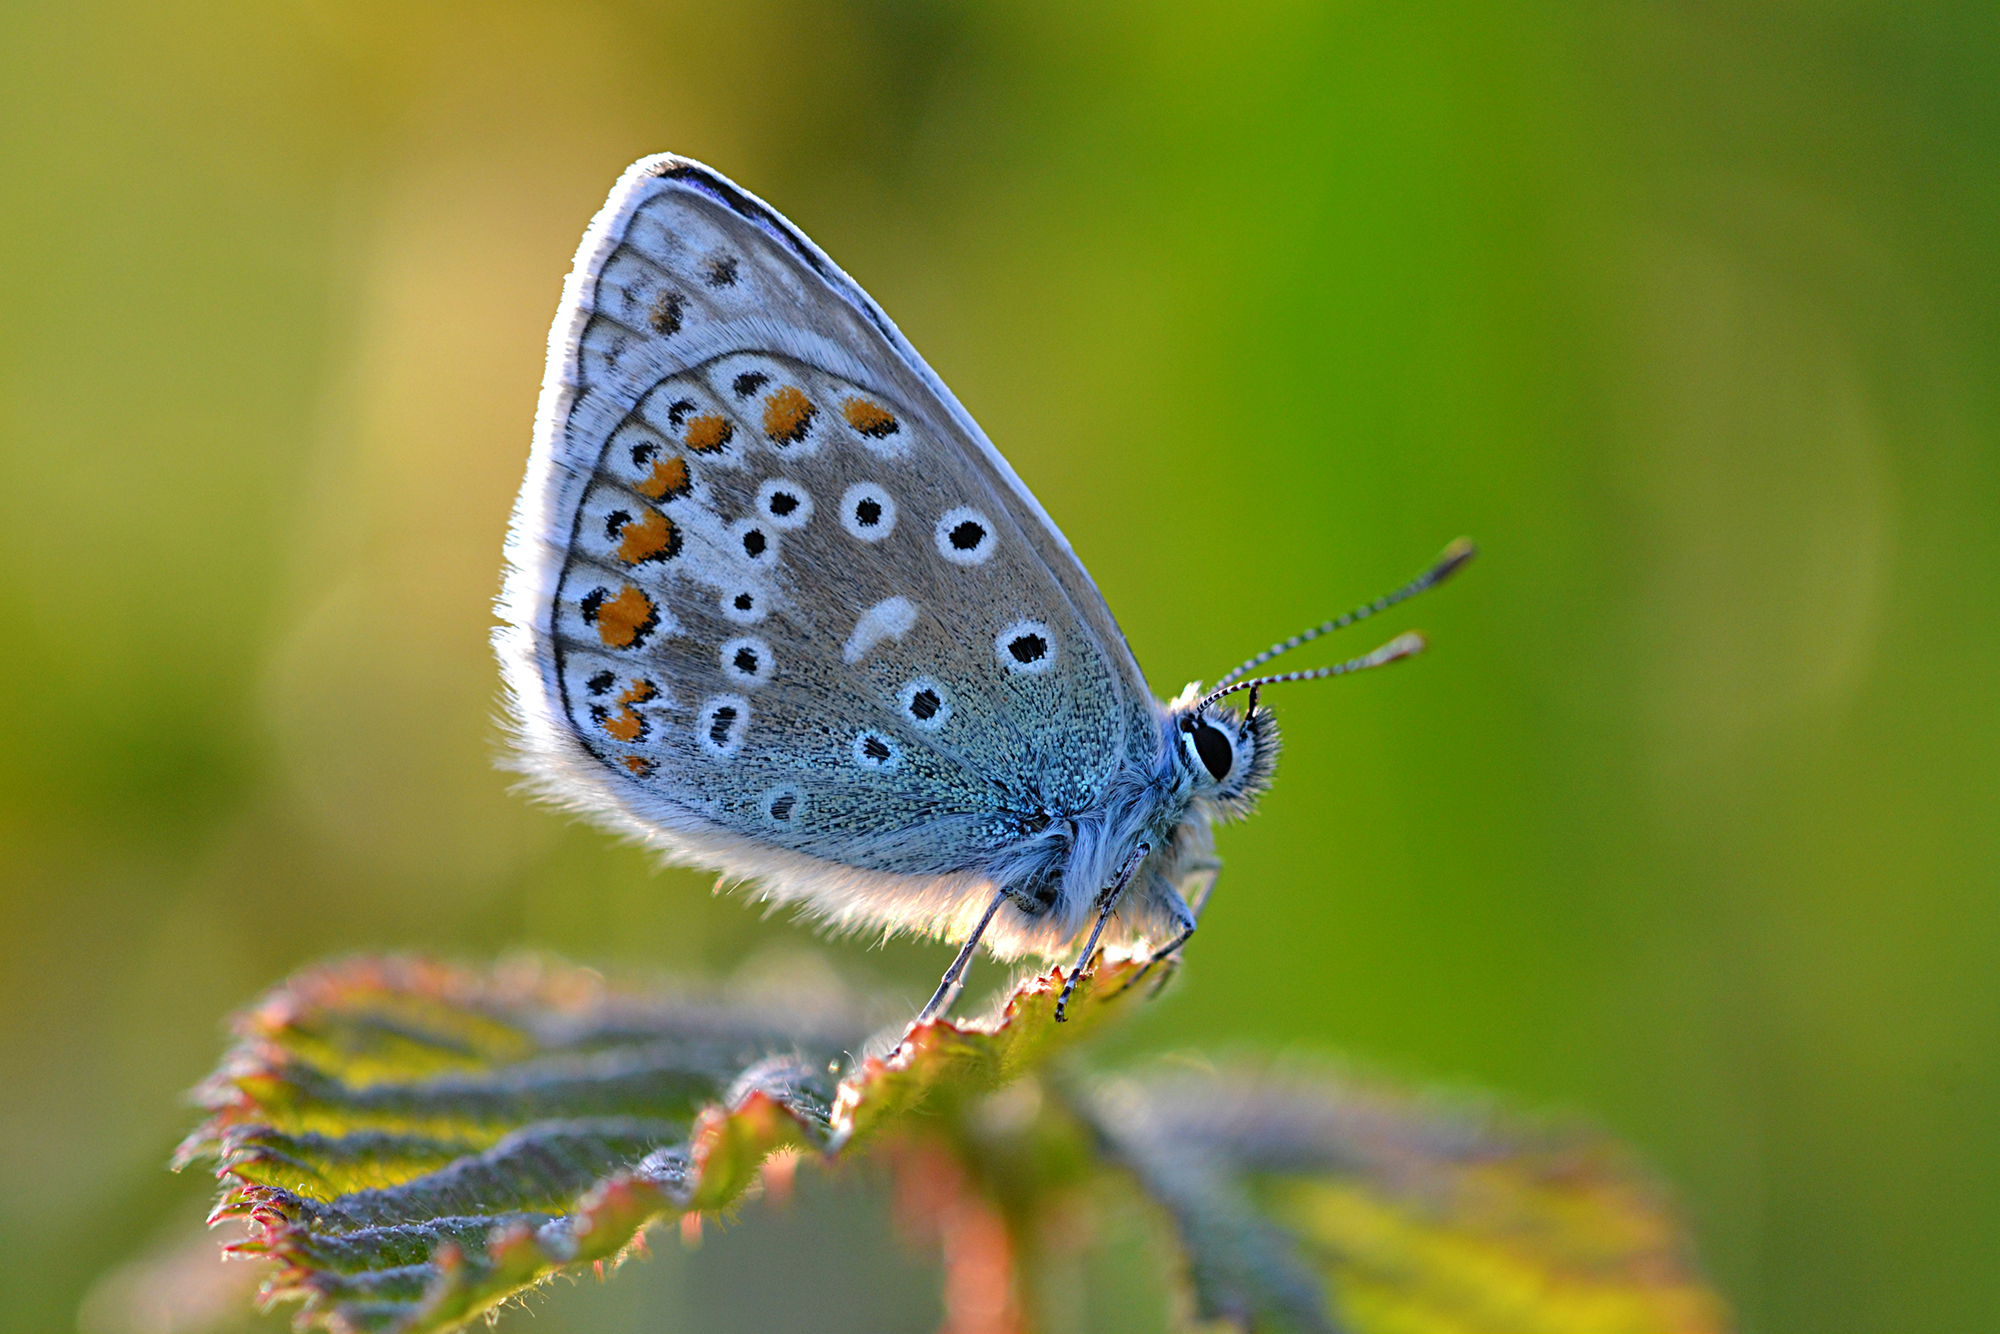 A beautifully back-lit male Common Blue butterfly perched on a leaf